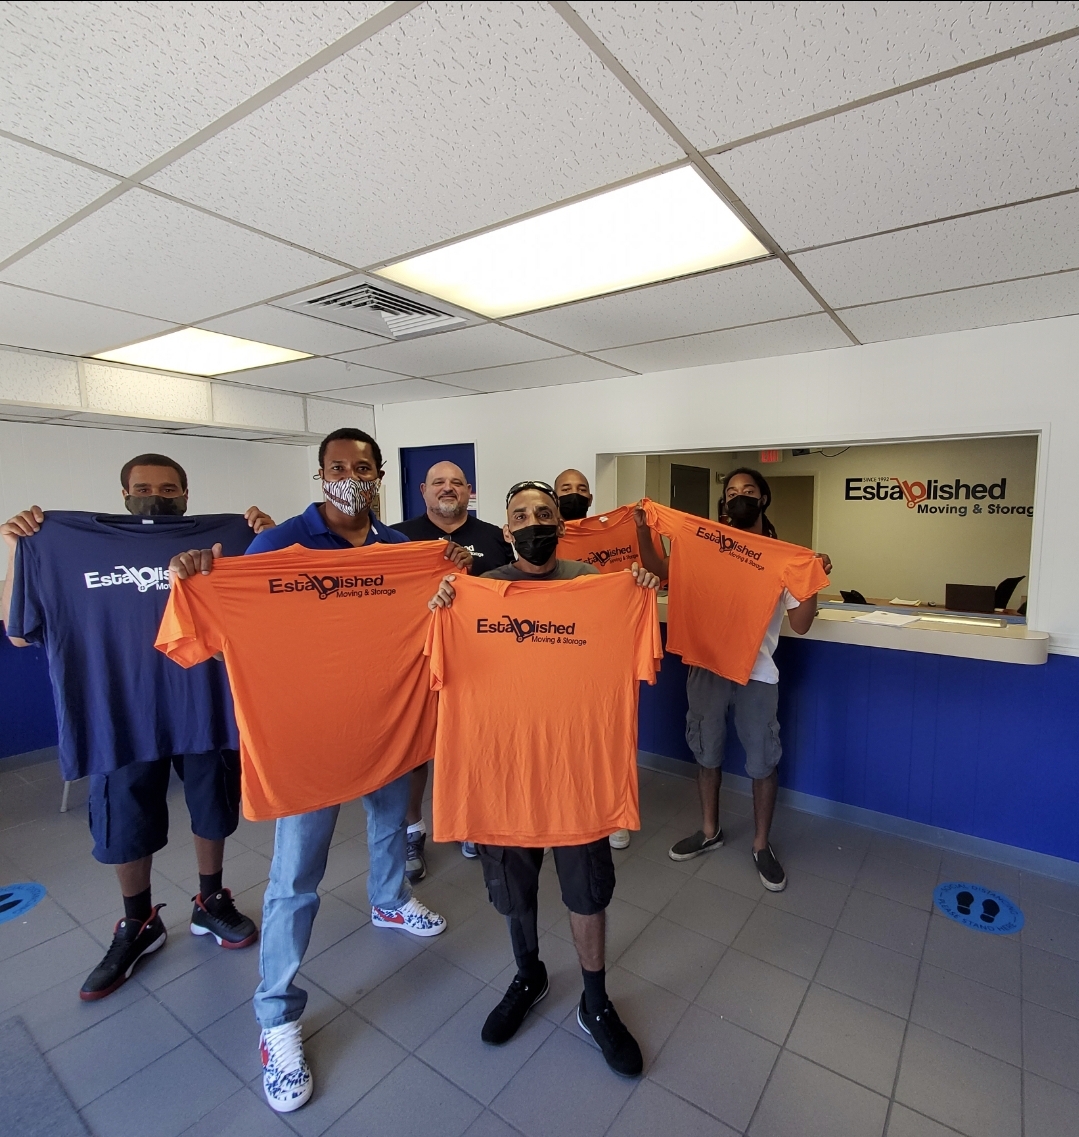 new members of the established moving & storage team poses with new team shirts